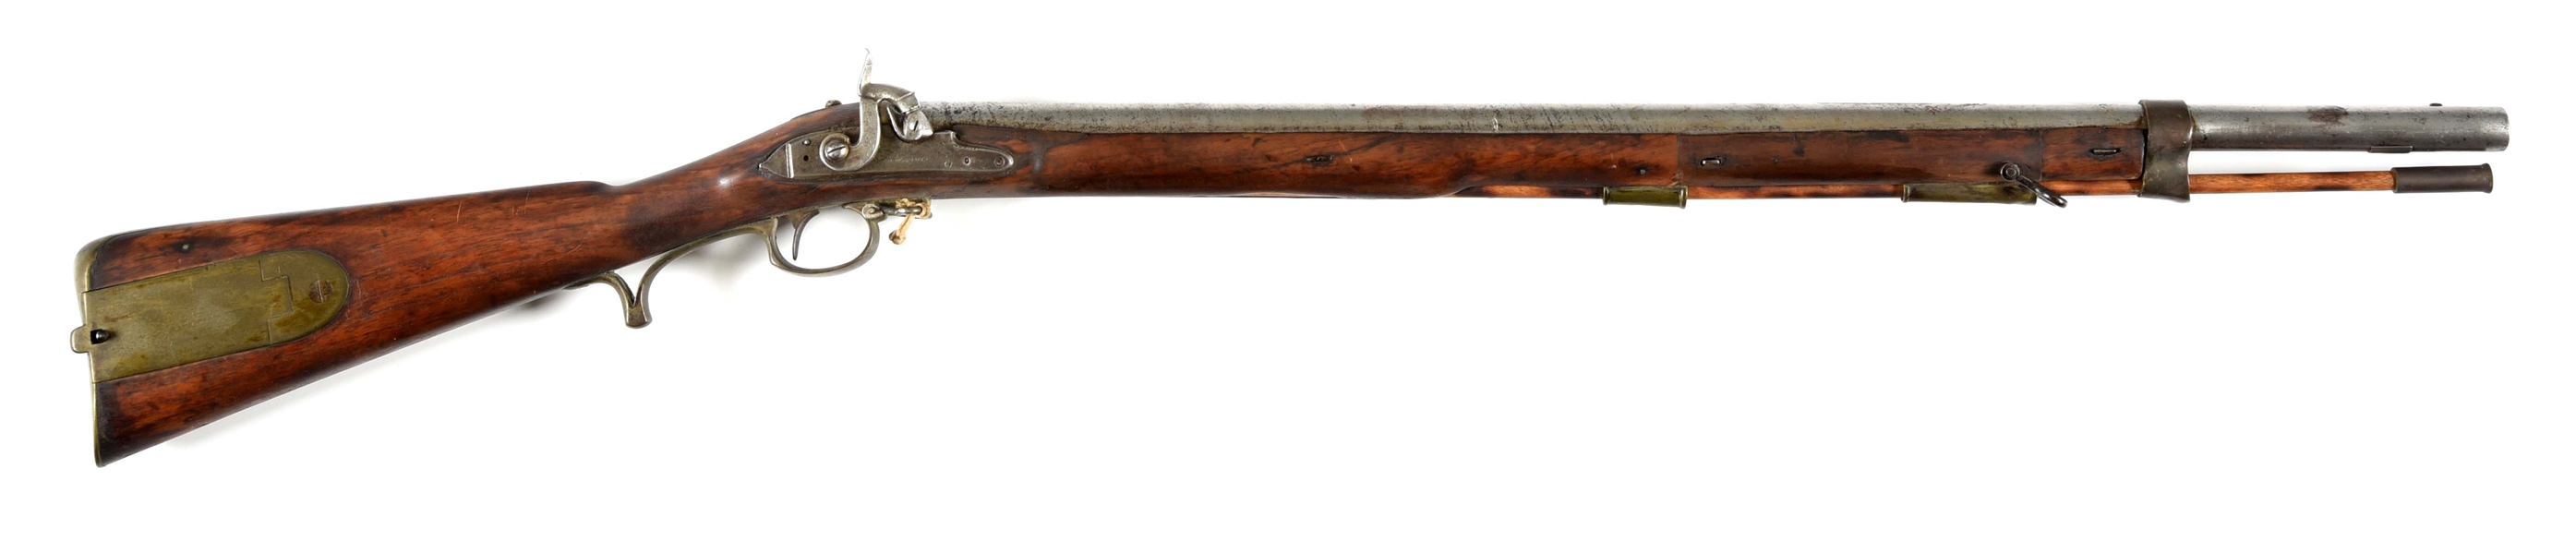 (A) STADTENMAYER SMOOTHBORE CARBINE.